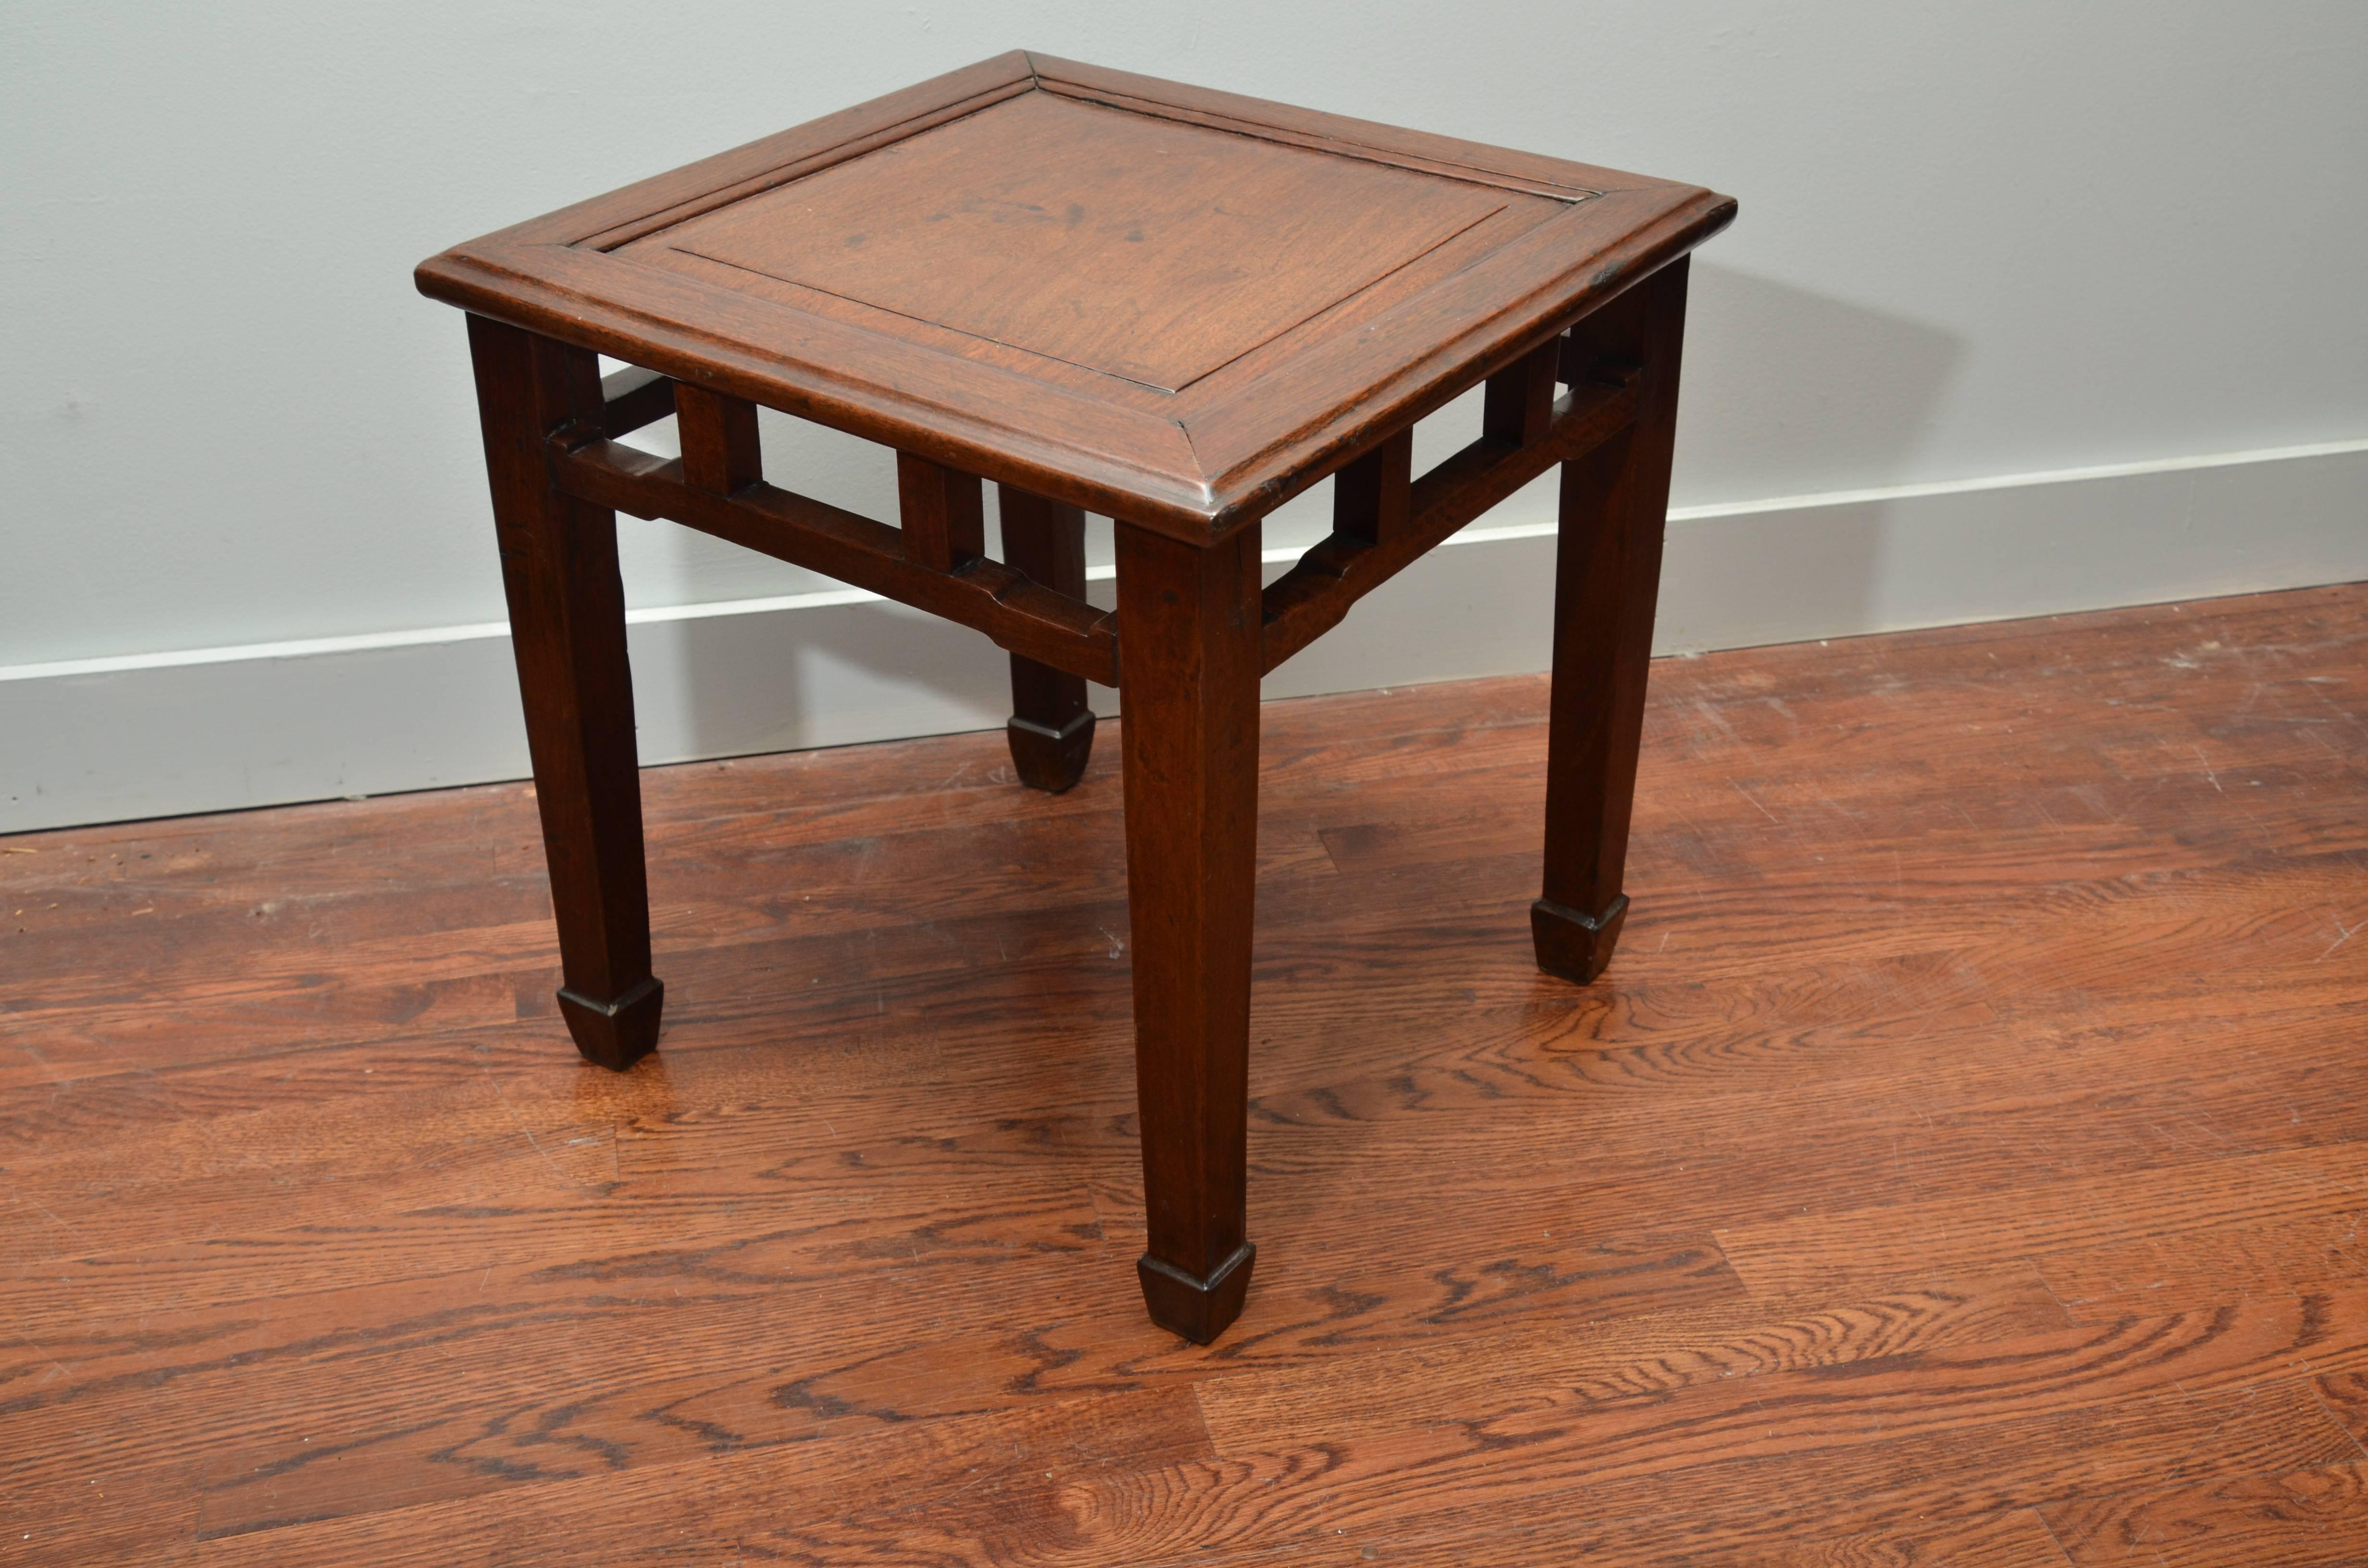 Late 19thC. Q'ing Dynasty Ming Styled Jumu Wood Stool/End Table In Excellent Condition For Sale In East Hampton, NY